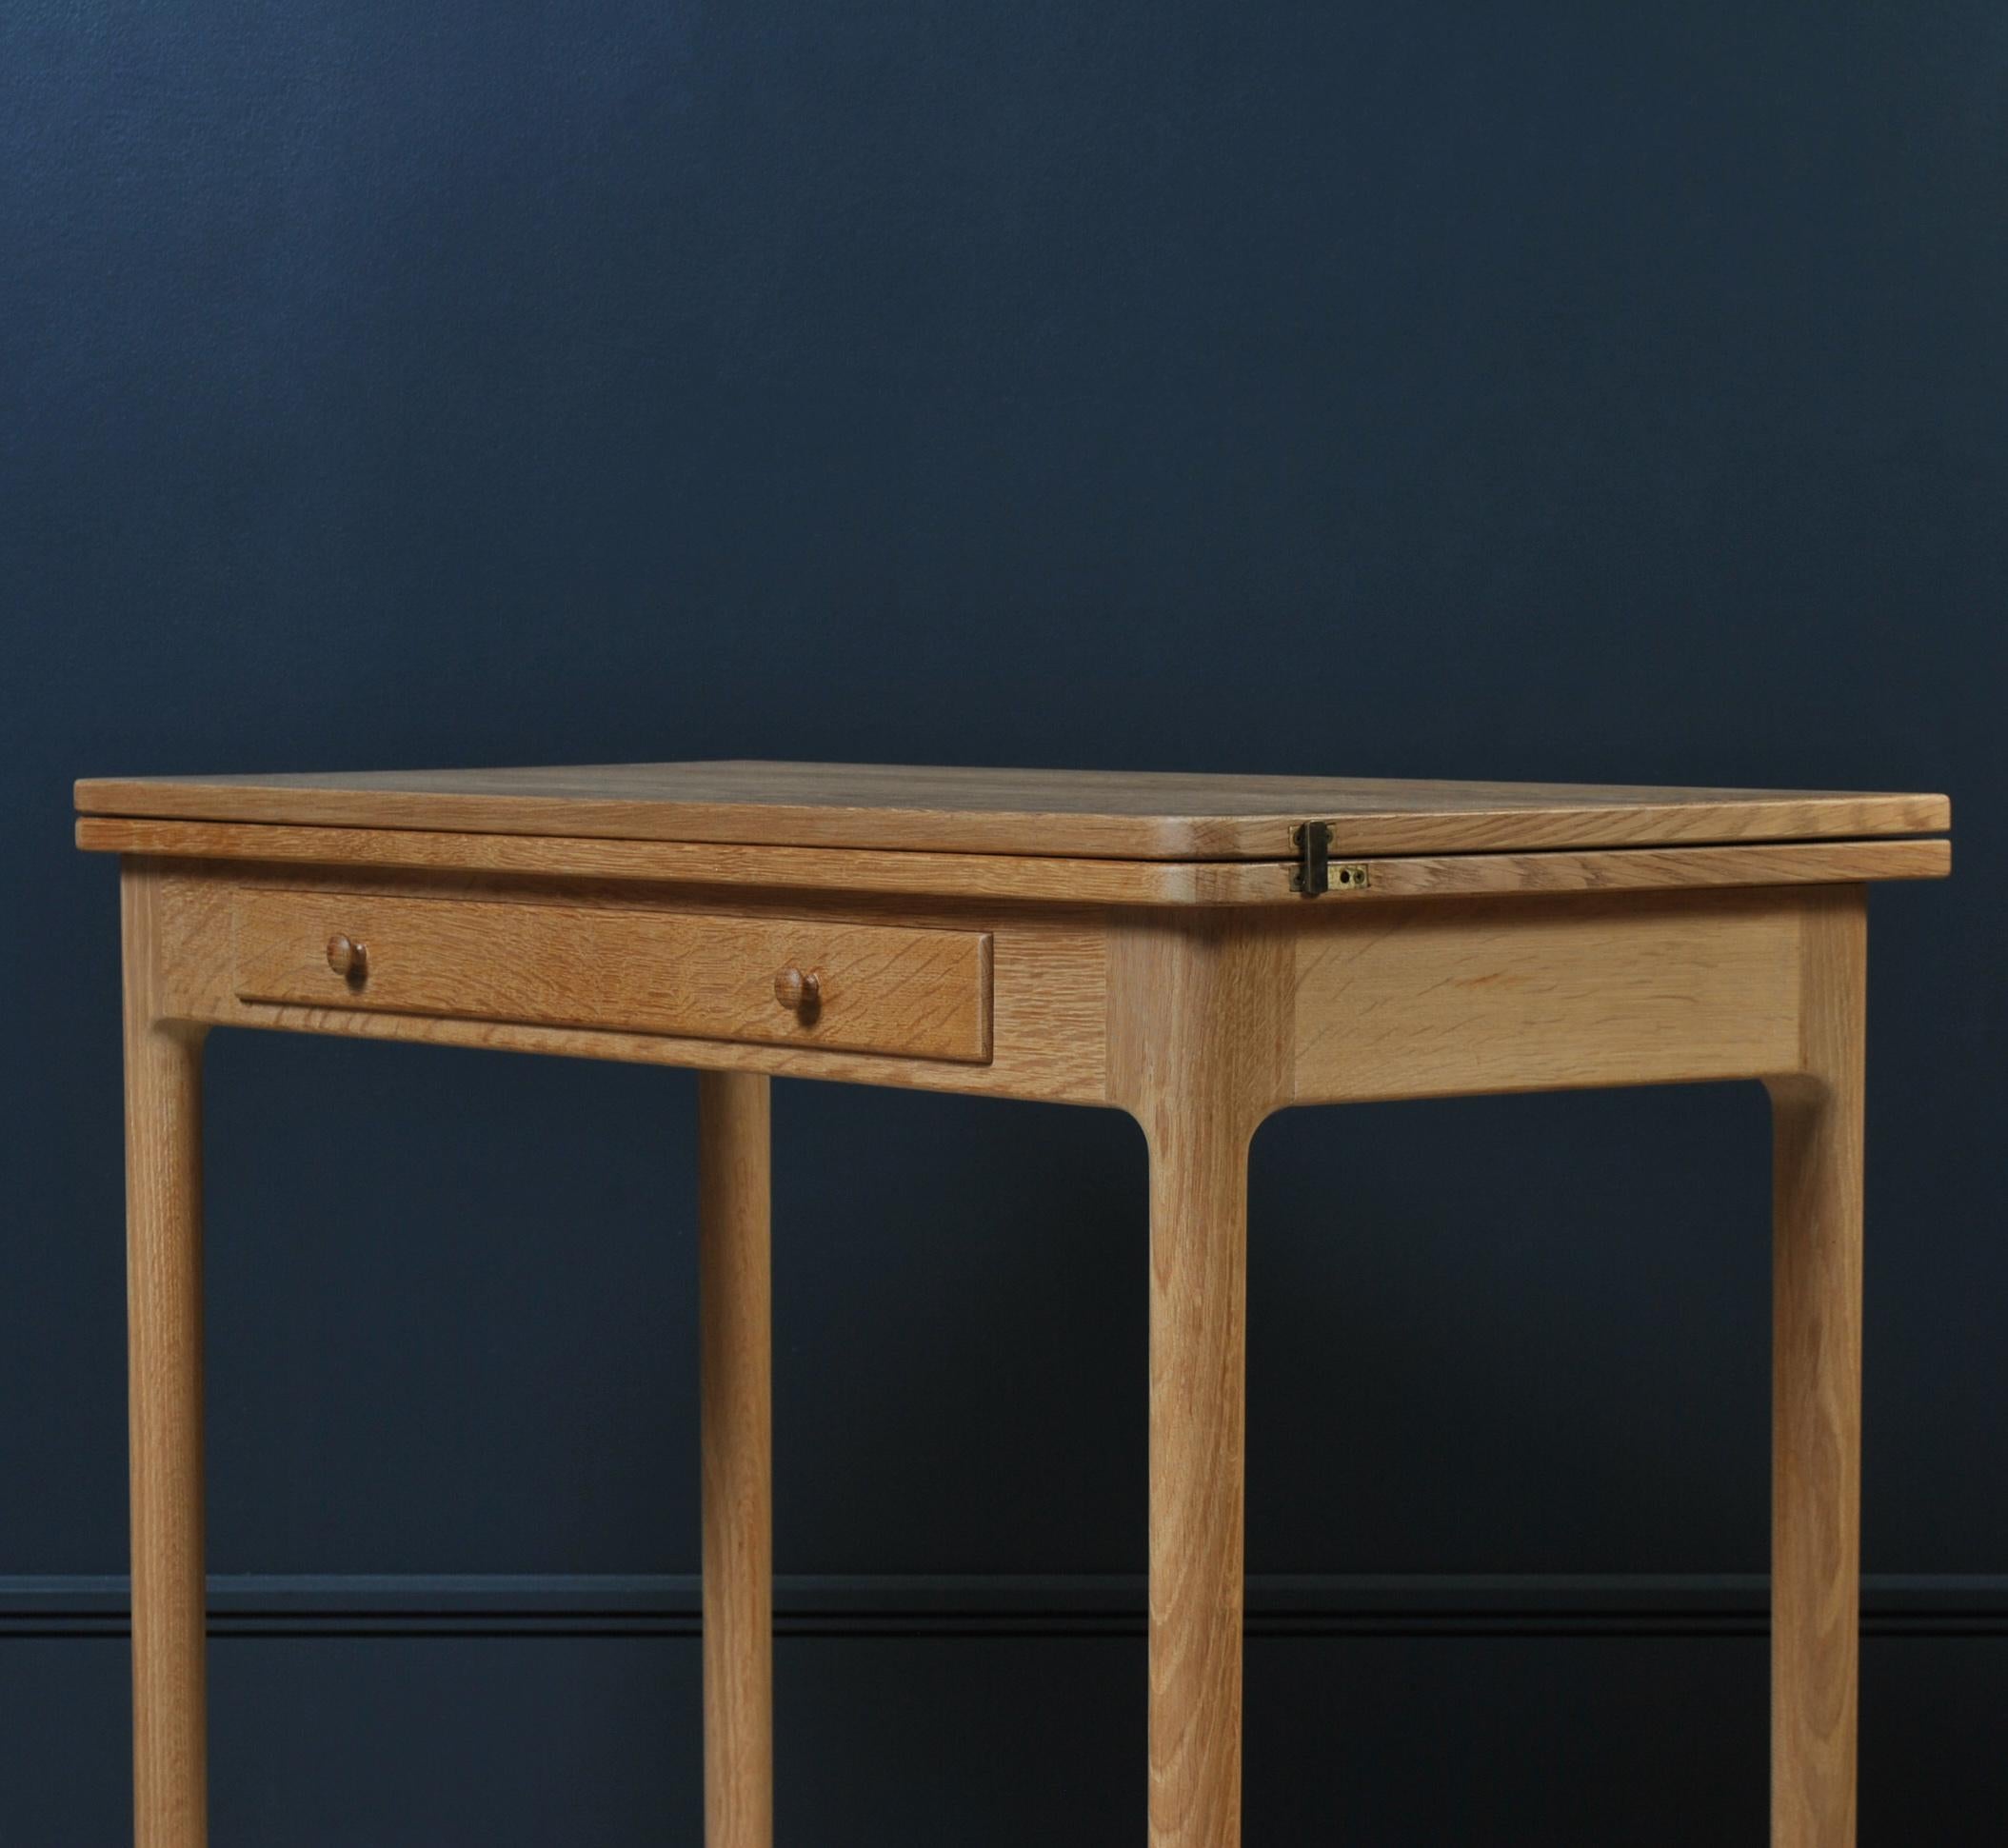 This wonderful little Midcentury European oak desk or console is incredibly well hand-crafted - not mass produced. The top can be unfastened, slid to one side and flipped open to create a larger table. Perhaps to serve as a games table etc. Either